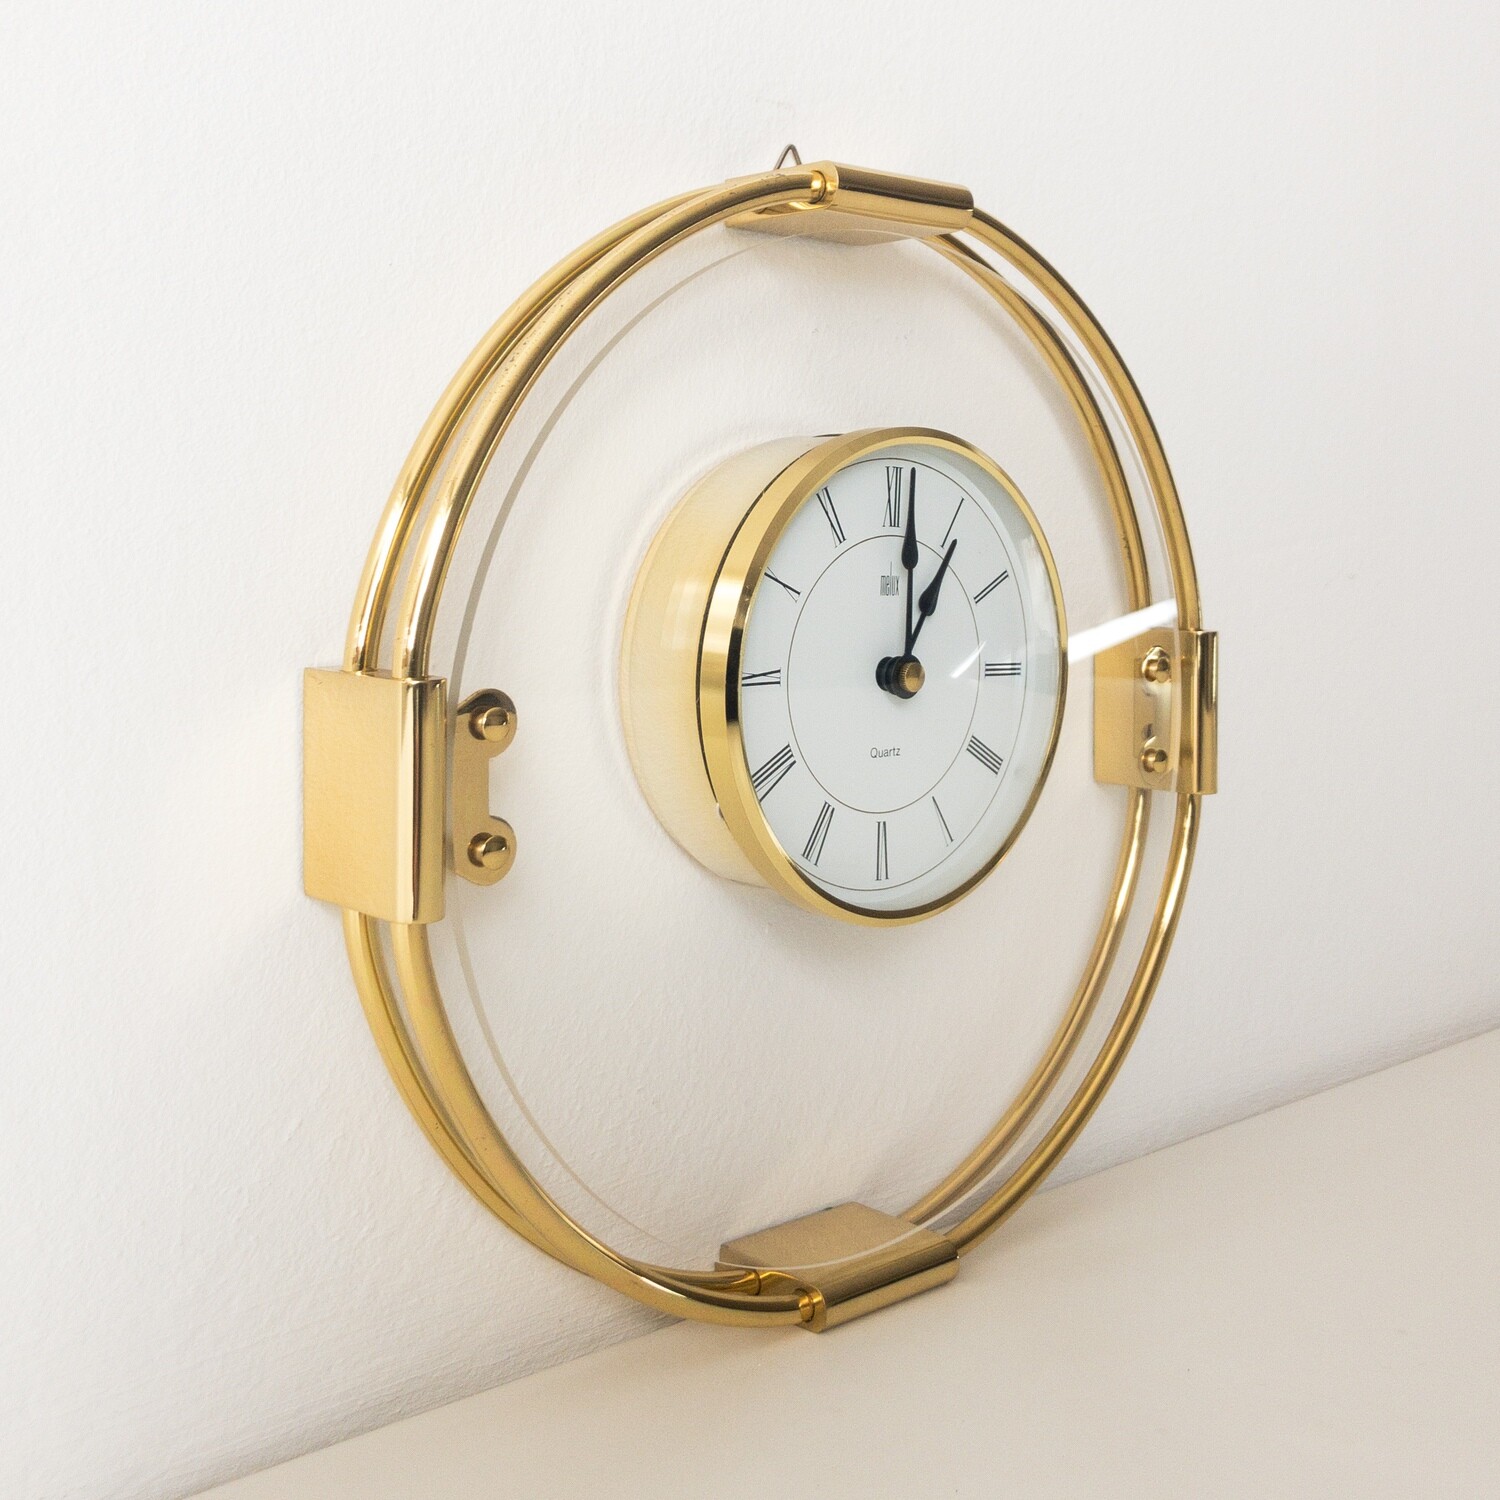 Melux wall clock, 1980s